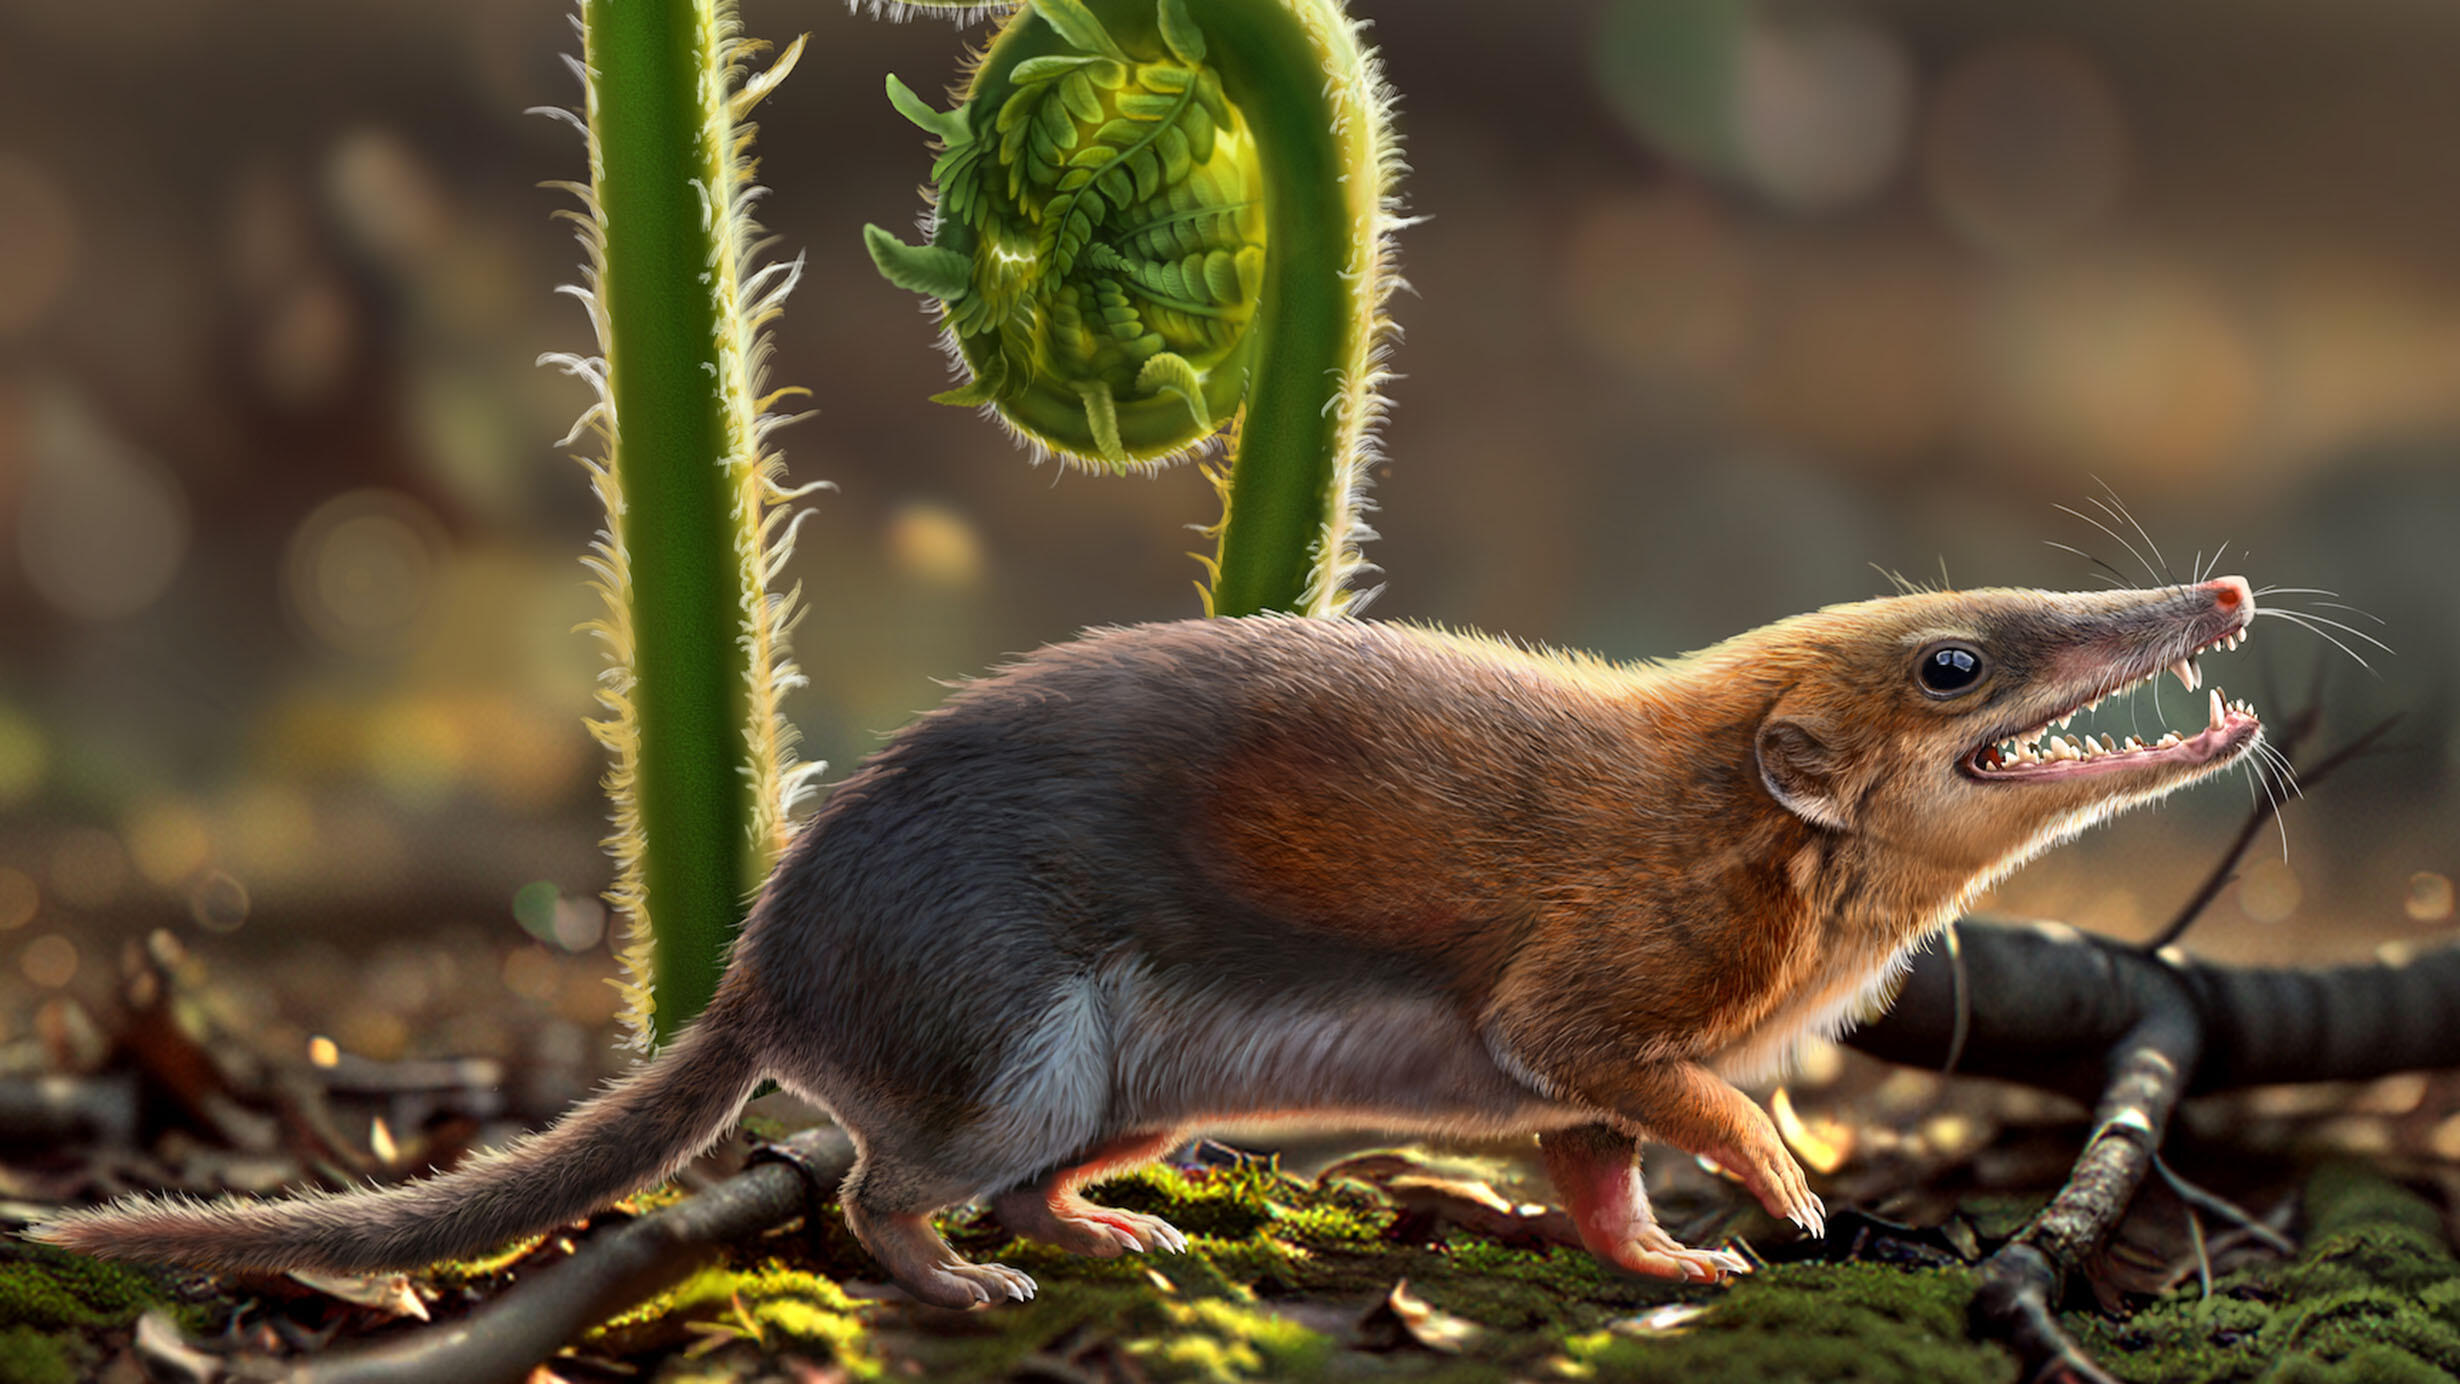 Rendering of a Dianoconodon youngi, a small mammal with a long mouth and sharp teeth.